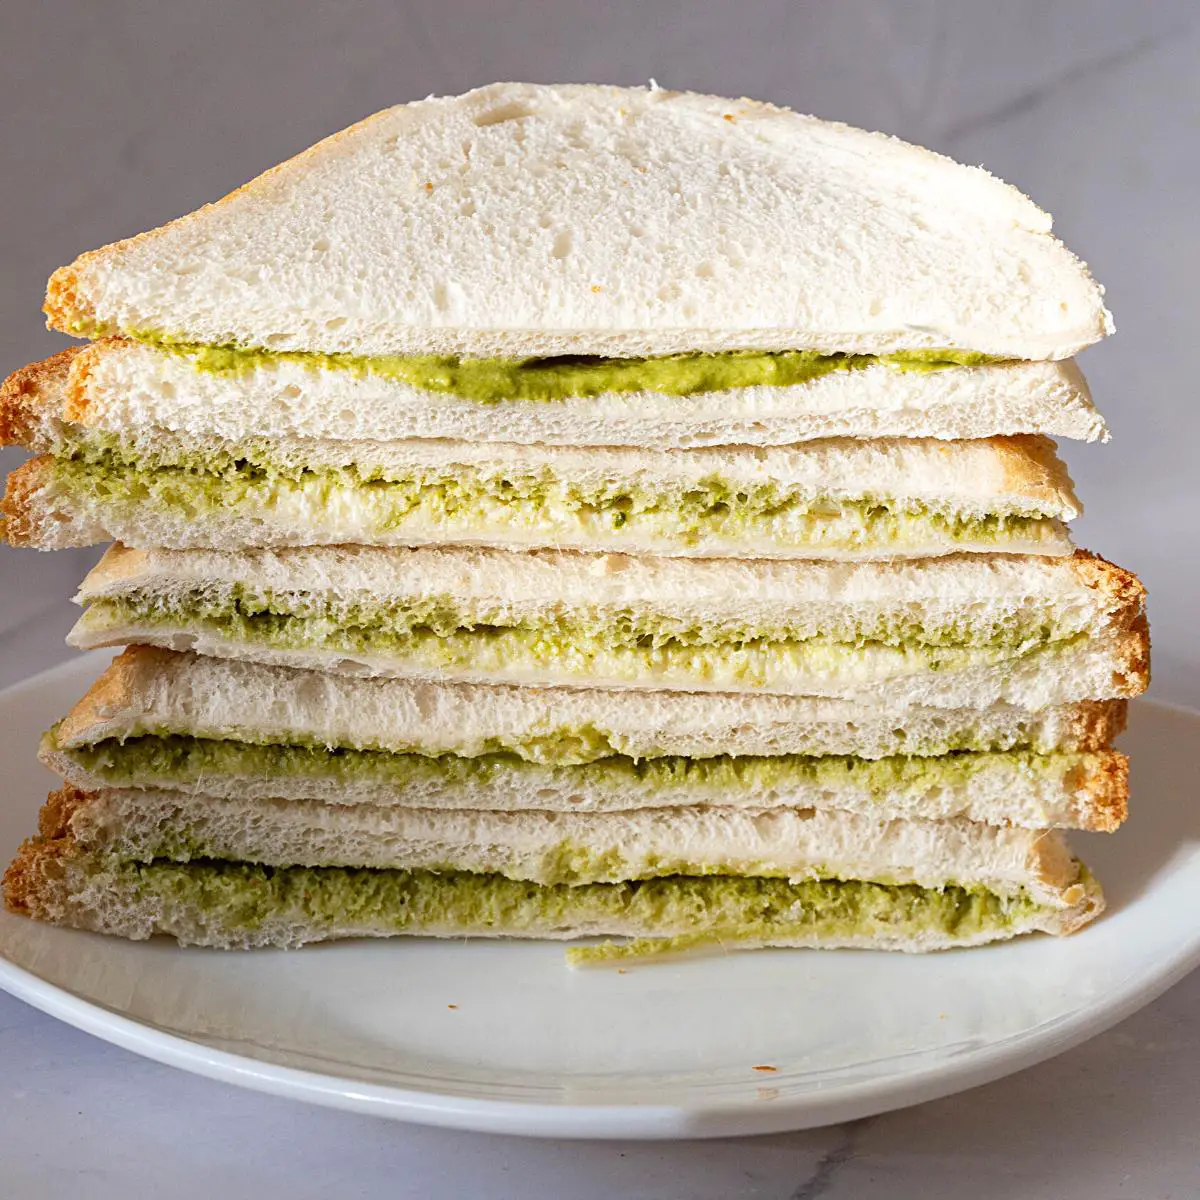 Sandwiches made with green chutney.